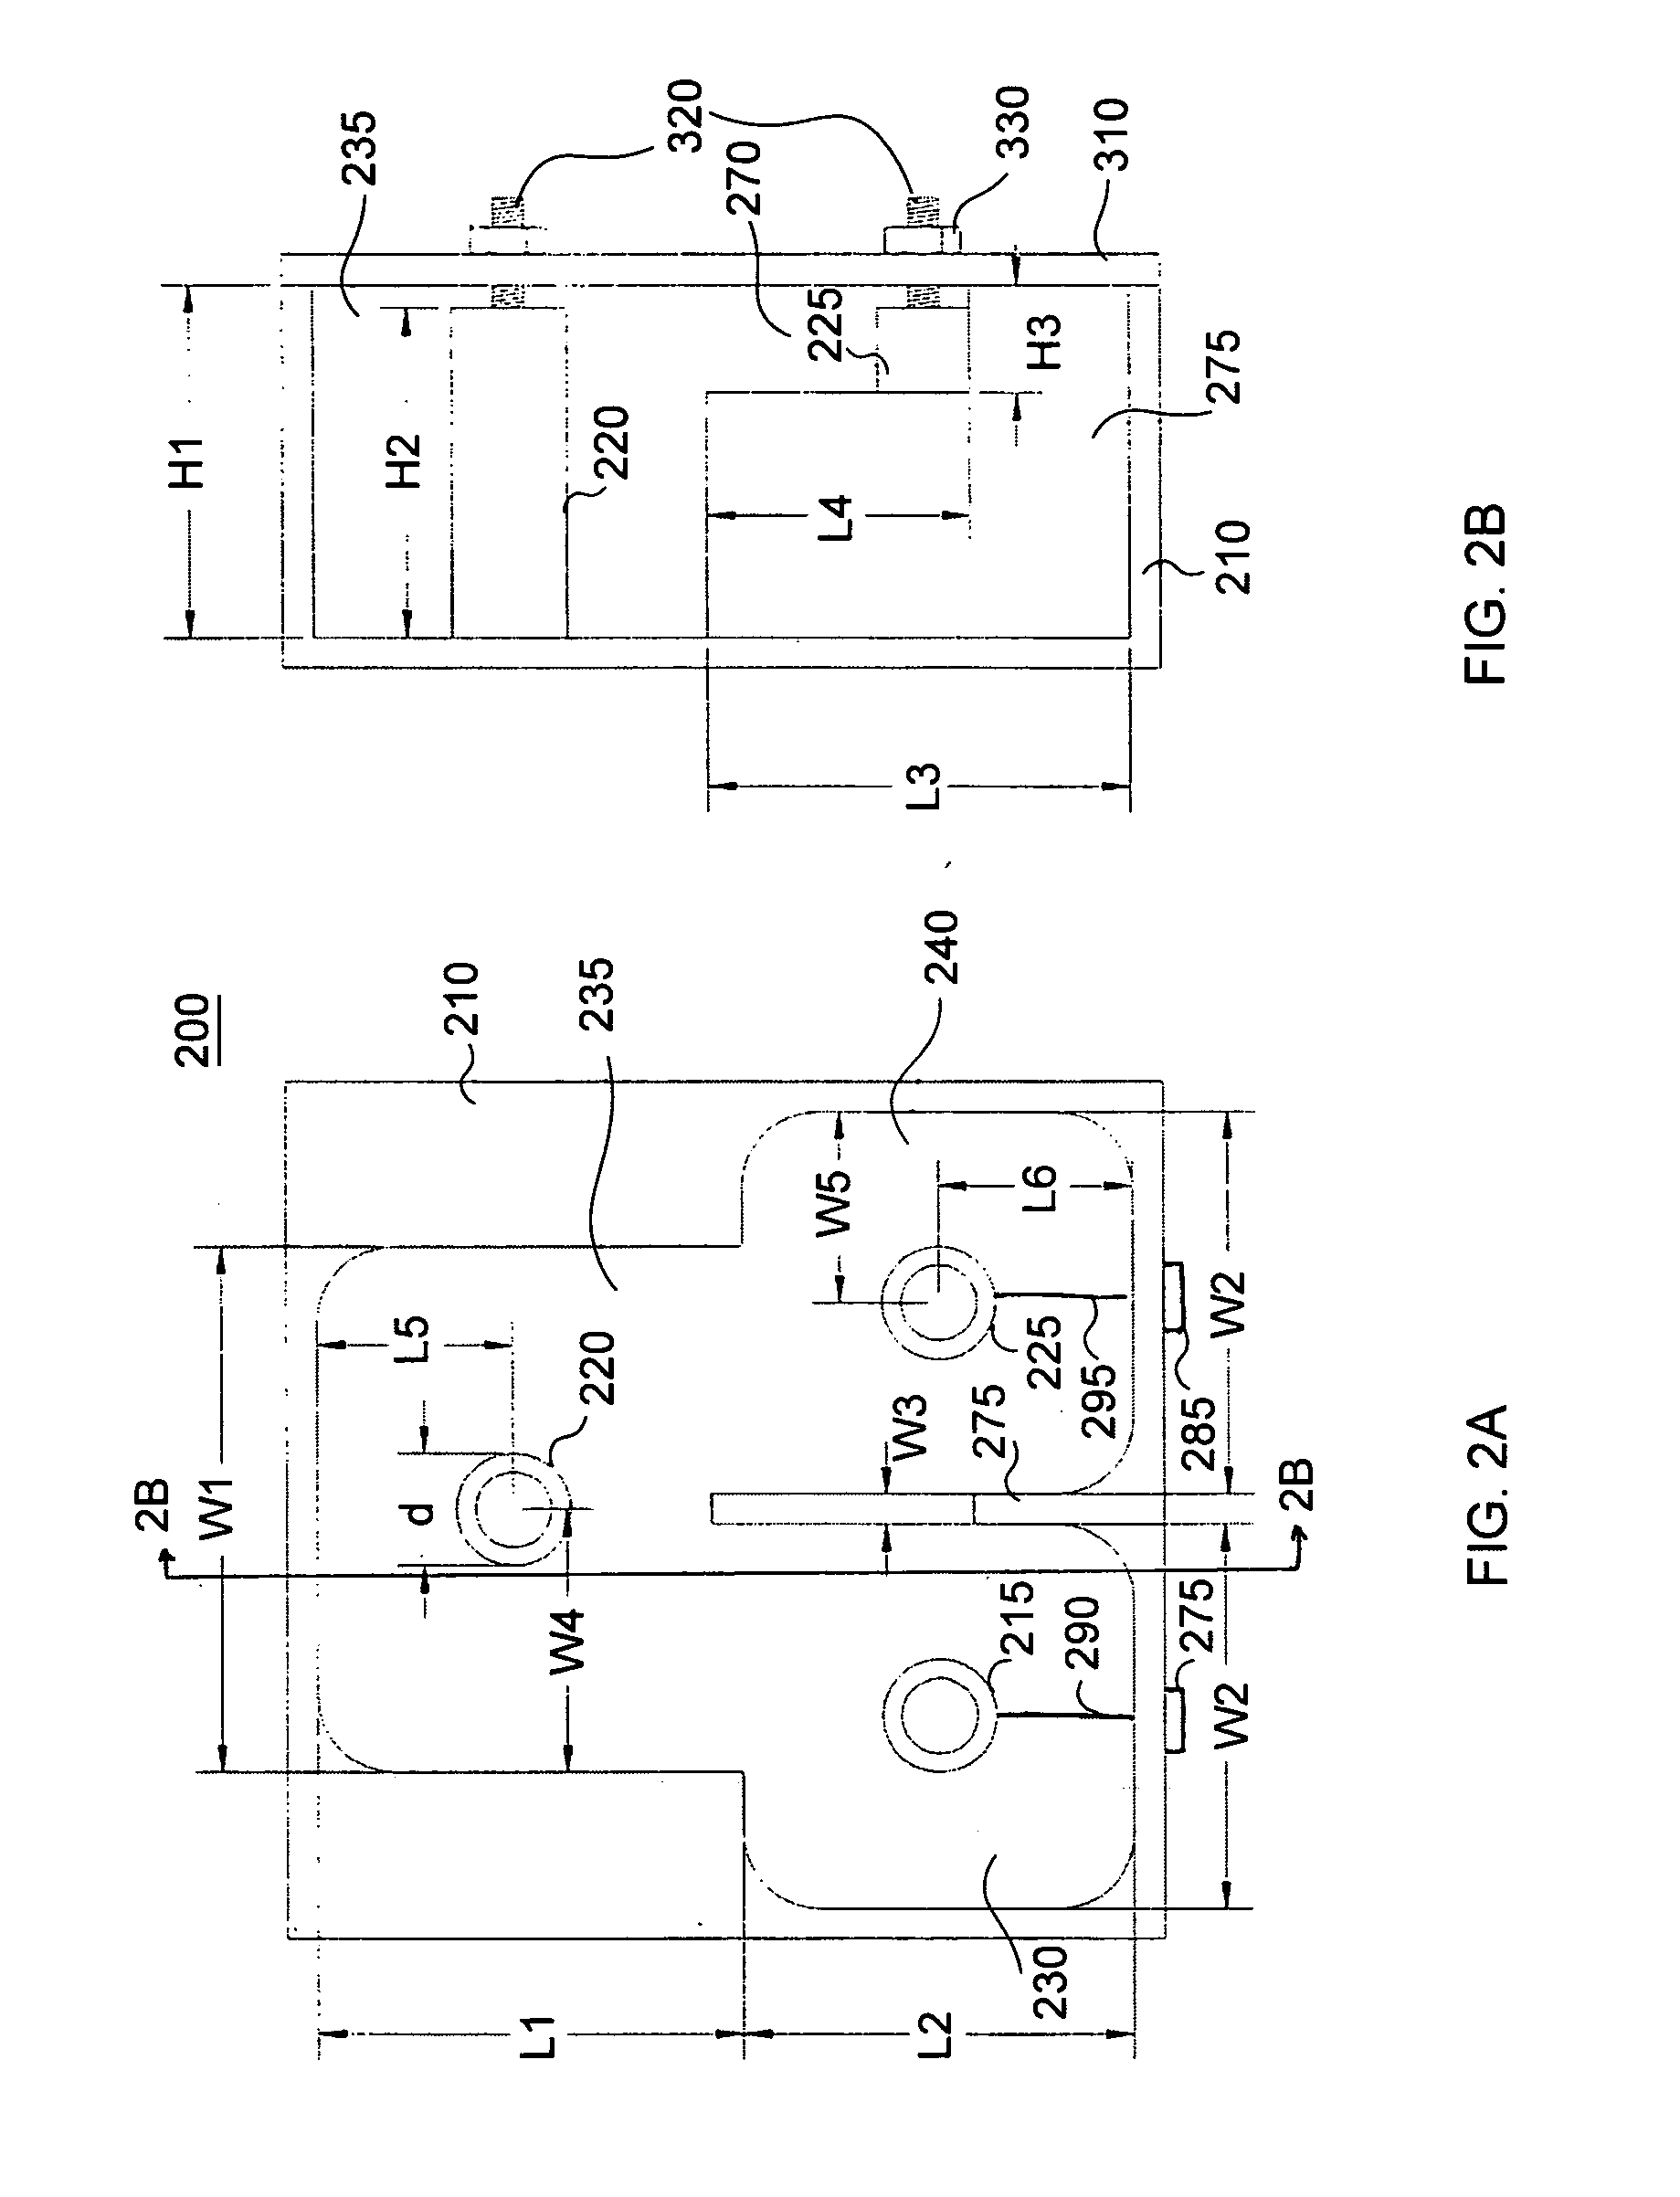 Systems and methods for signal filtering